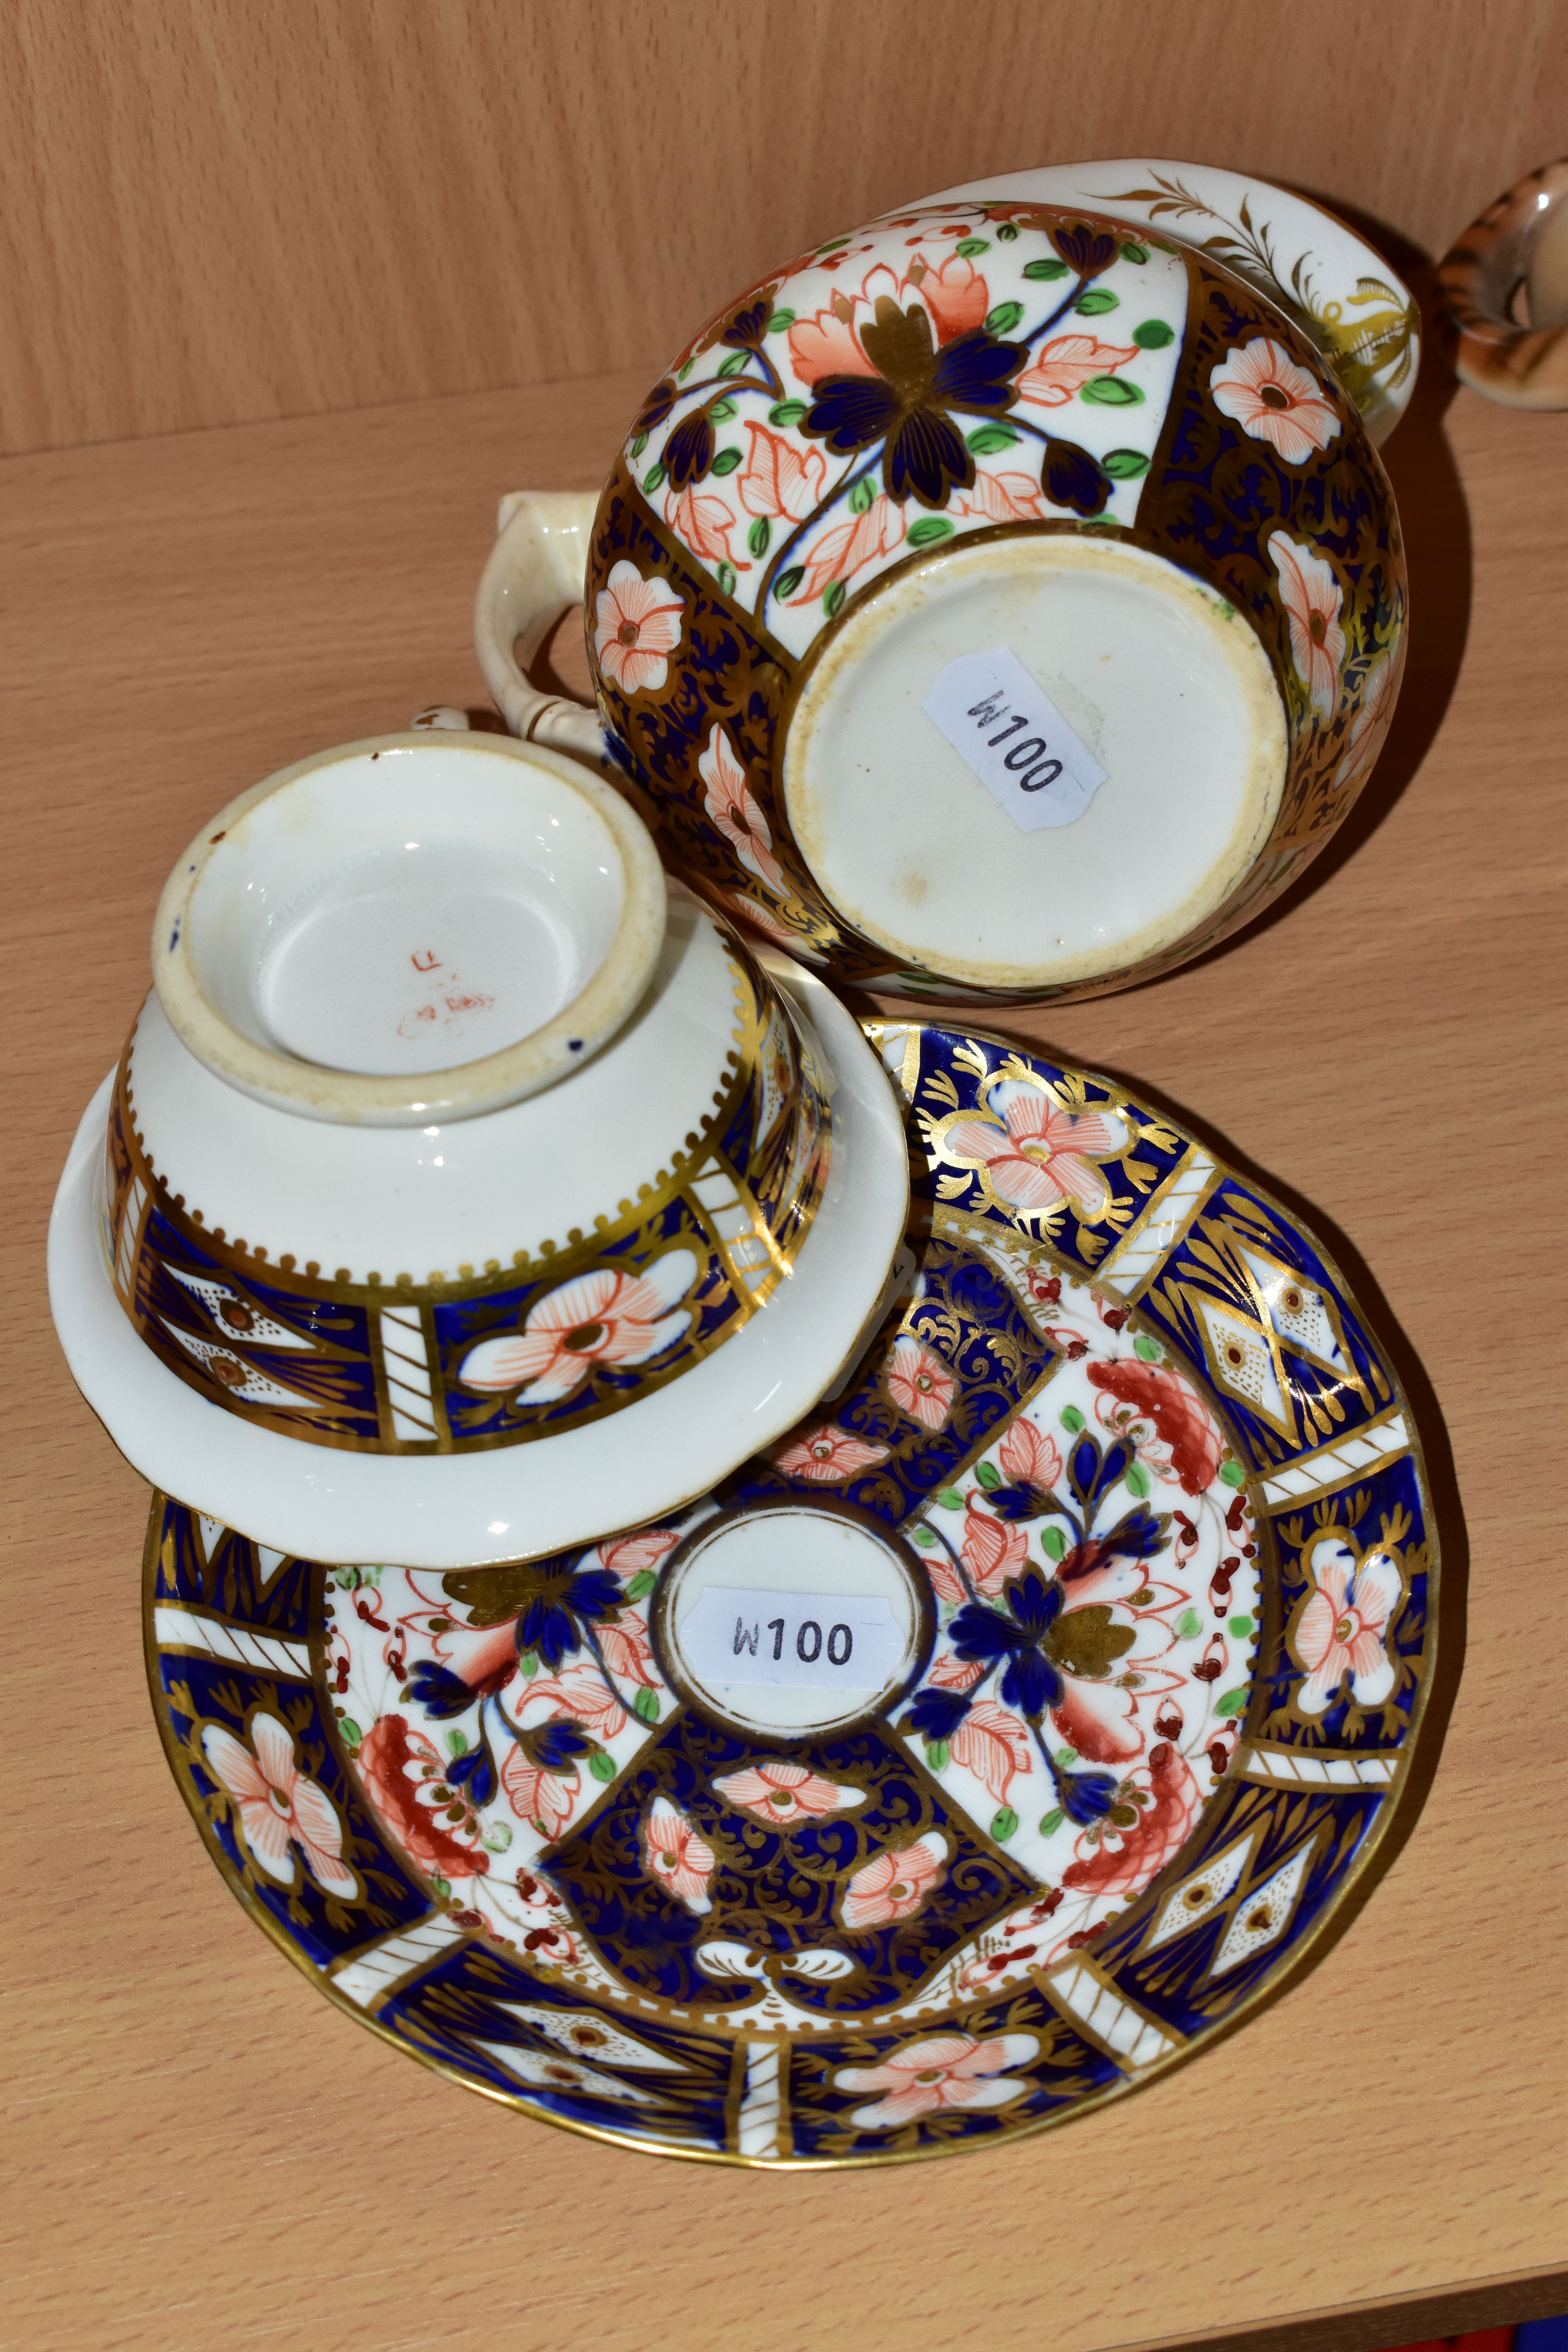 A NINETEENTH CENTURY ENGLISH TEACUP, SAUCER AND CREAM JUG, in an Imari pattern, the teacup having - Image 4 of 4